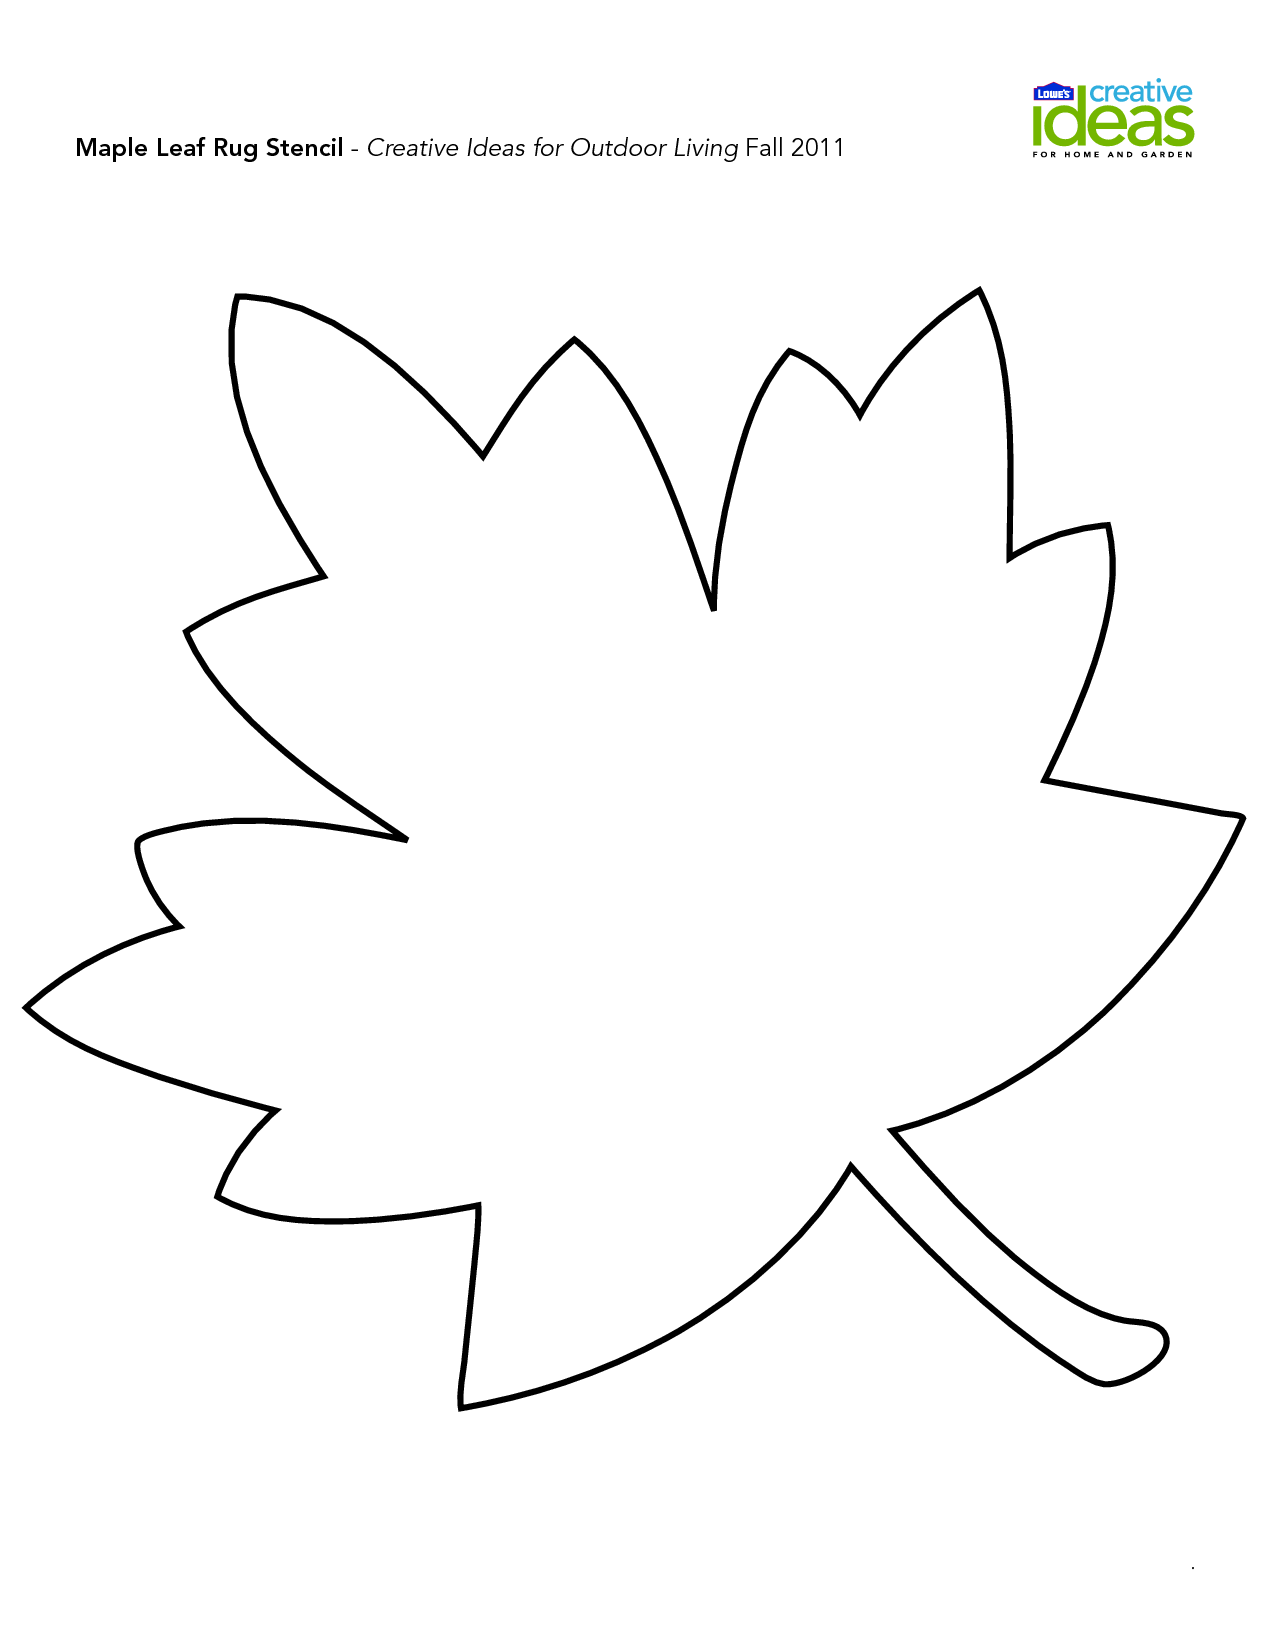 Leaf Template Cliparts.co